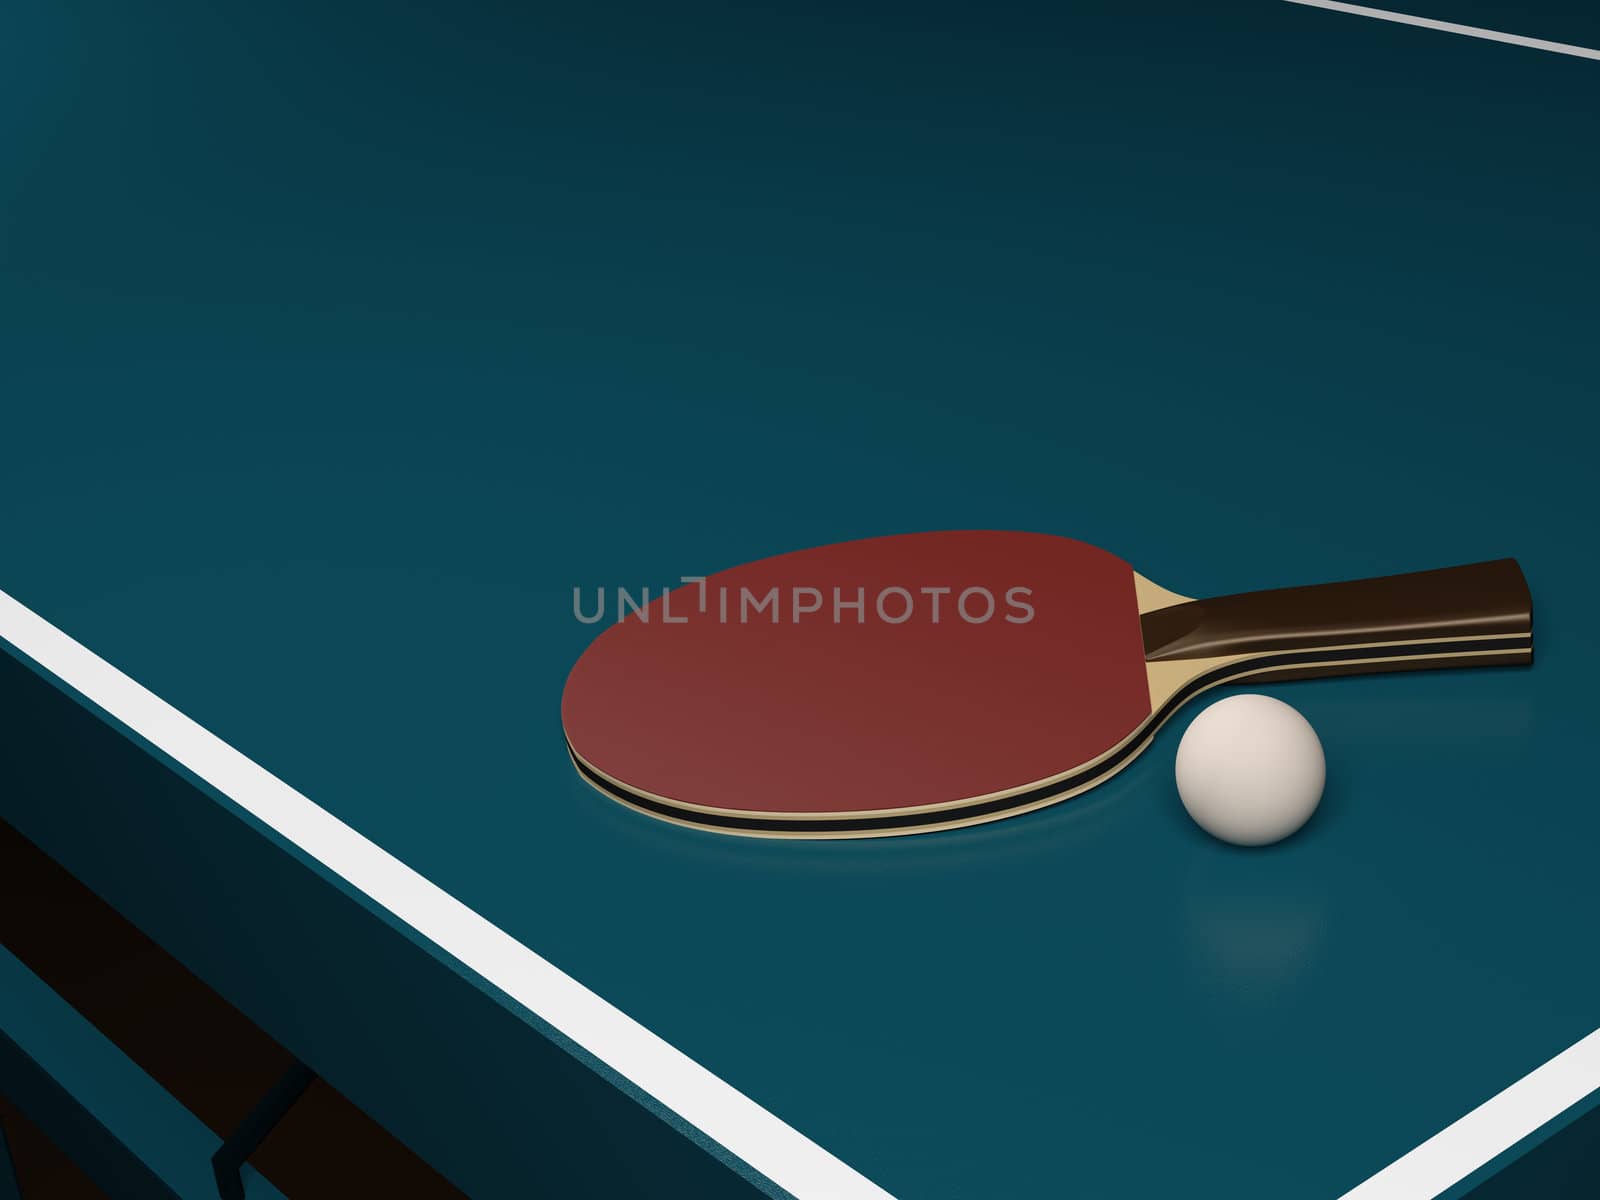 Table Tennis with One Racket and a Ball by shkyo30